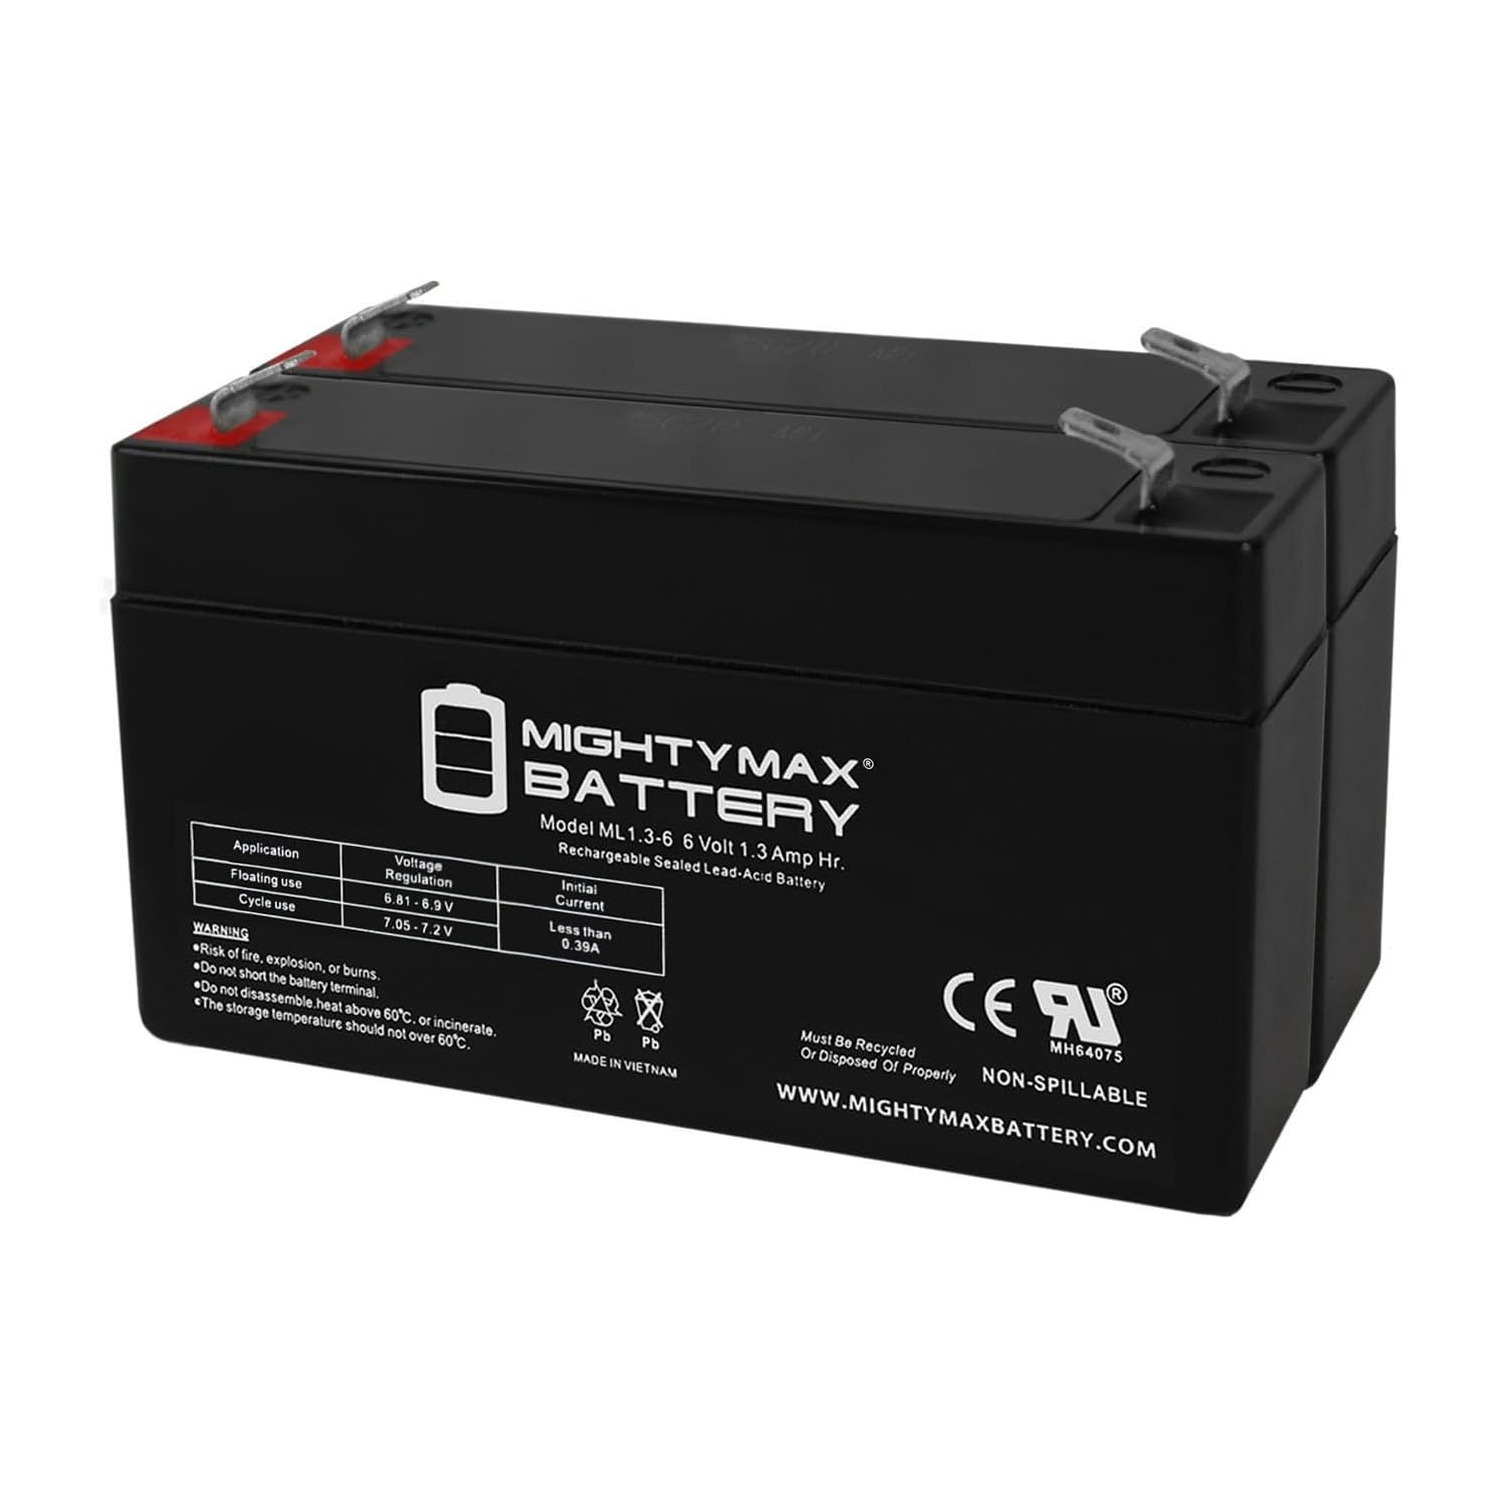 6V 1.3Ah SLA Replacement Battery for Portalac GS RBC48 - 2 Pack